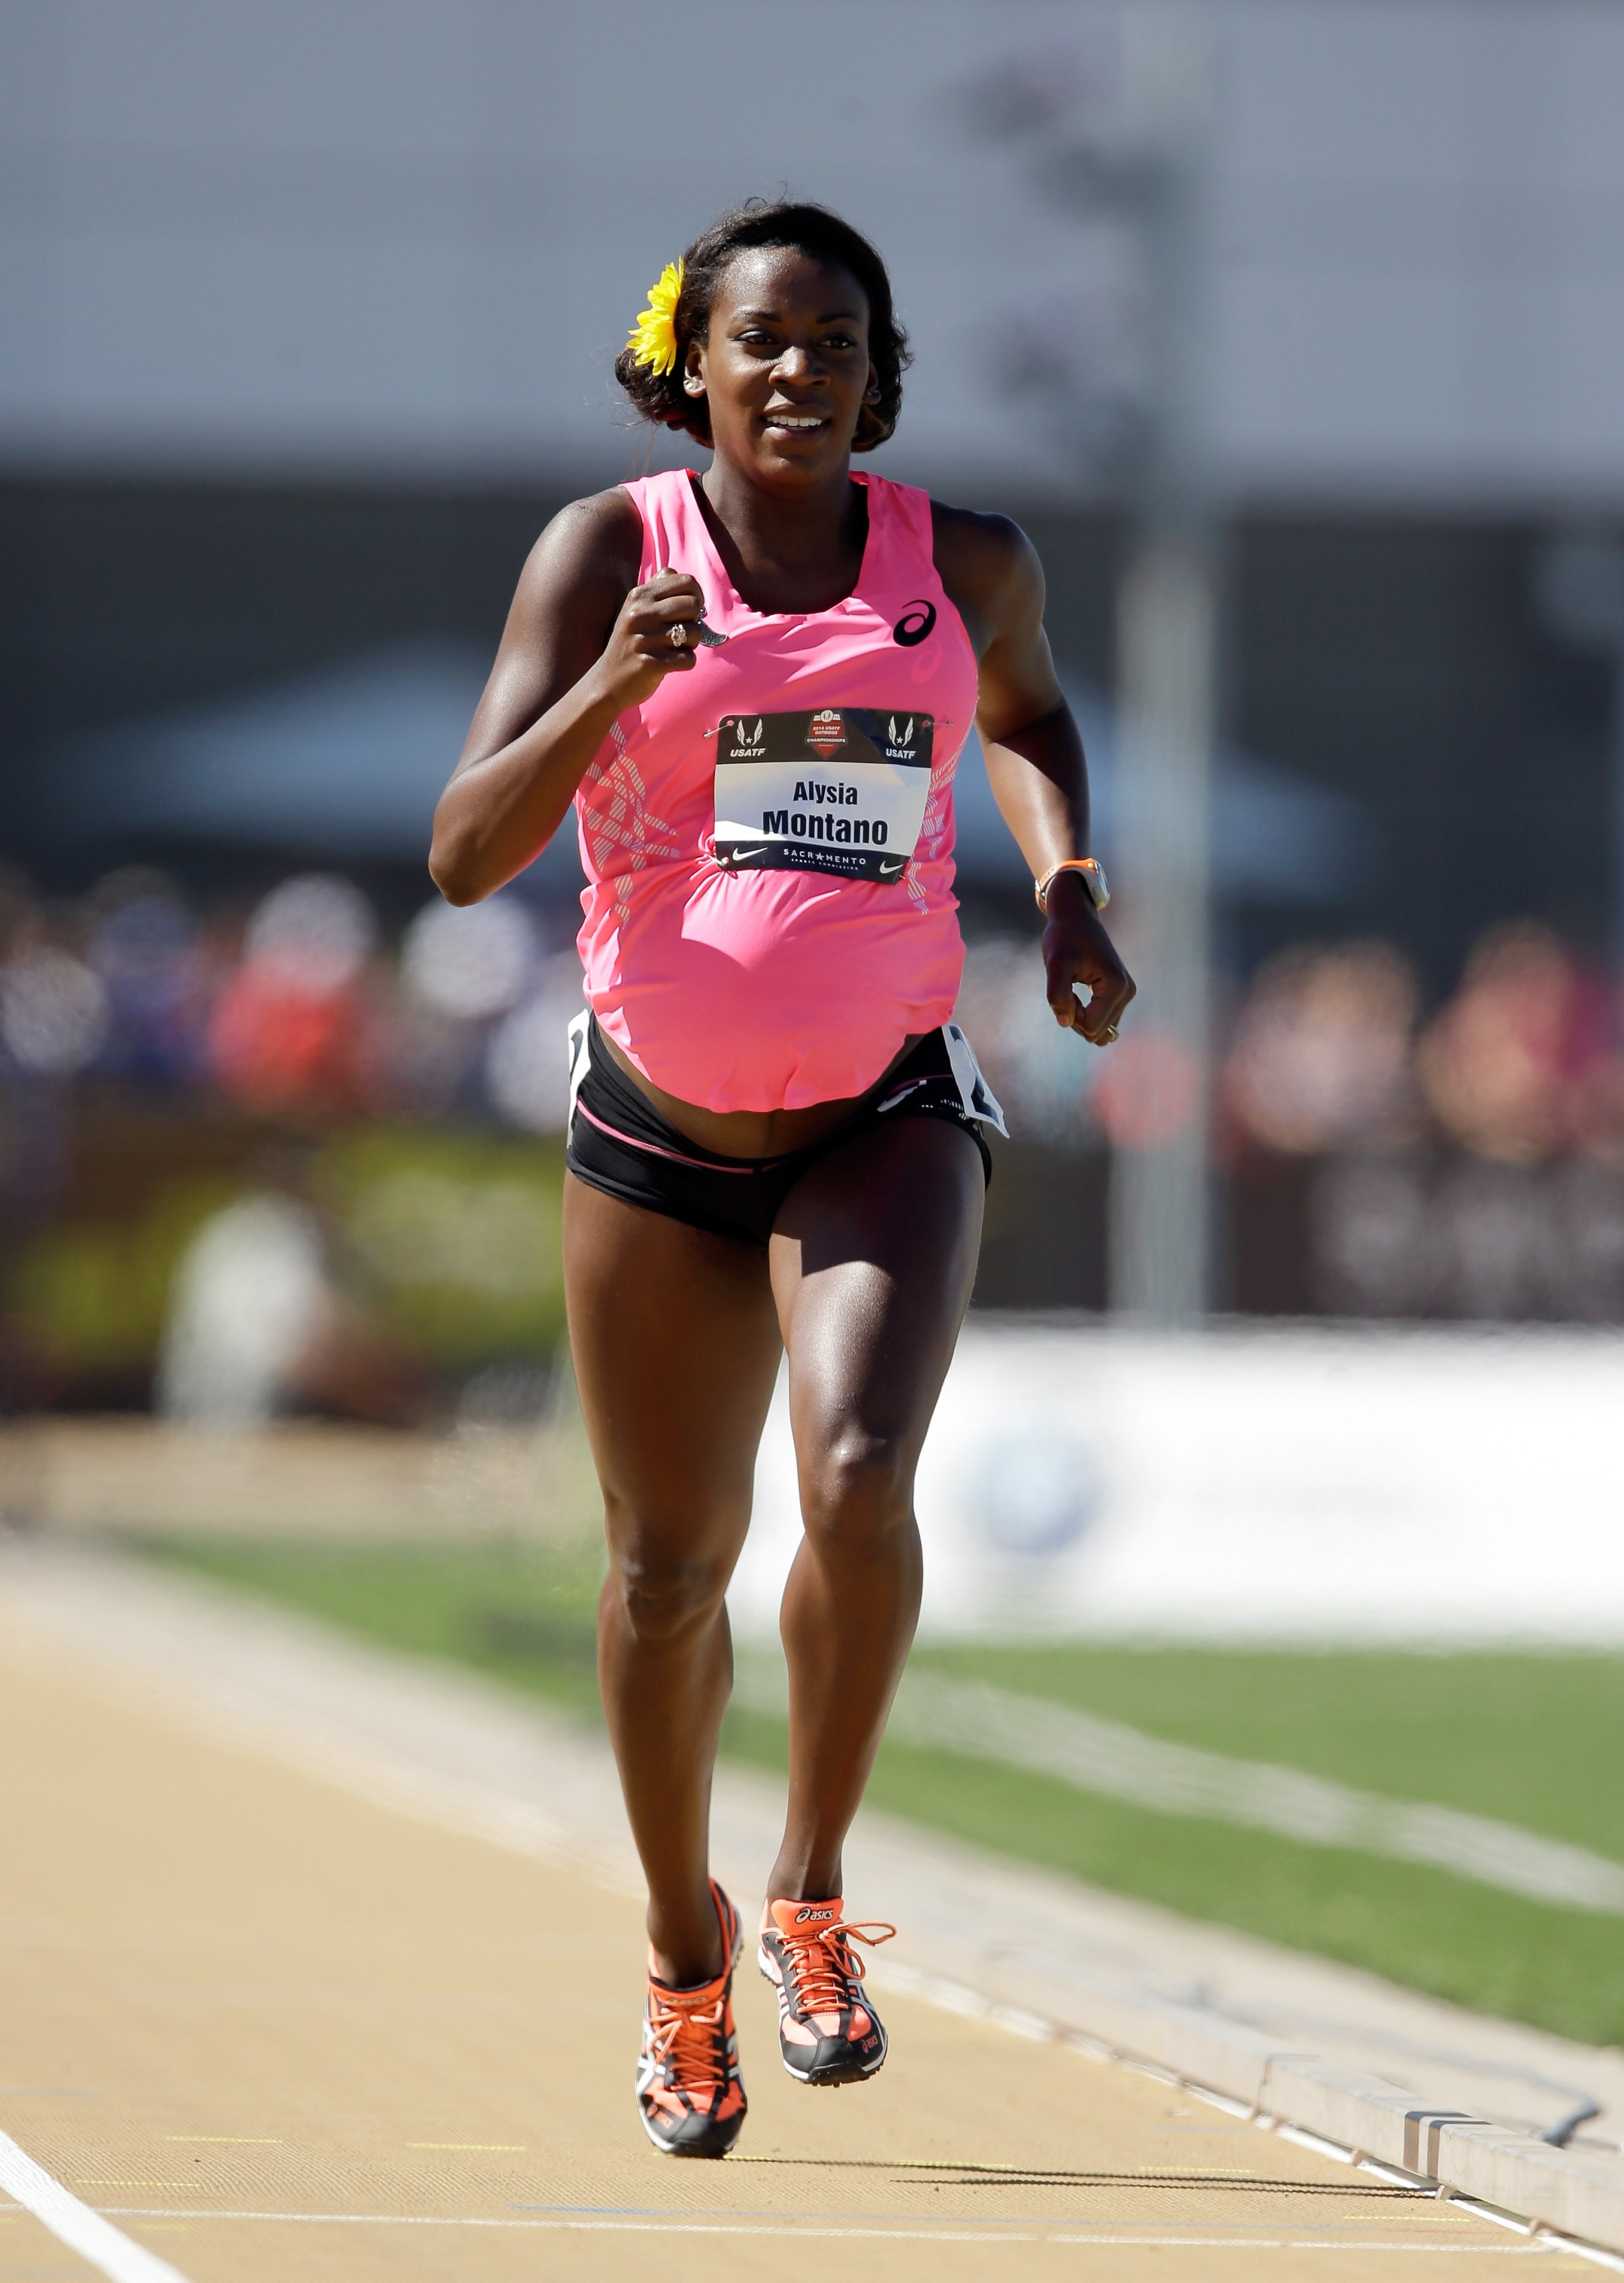 A pregnant Alysia Montano runs in the opening round of the women's 800 meter run during day 2 of the USATF Outdoor Championships at Hornet Stadium in Sacramento, California on on June 26, 2014.